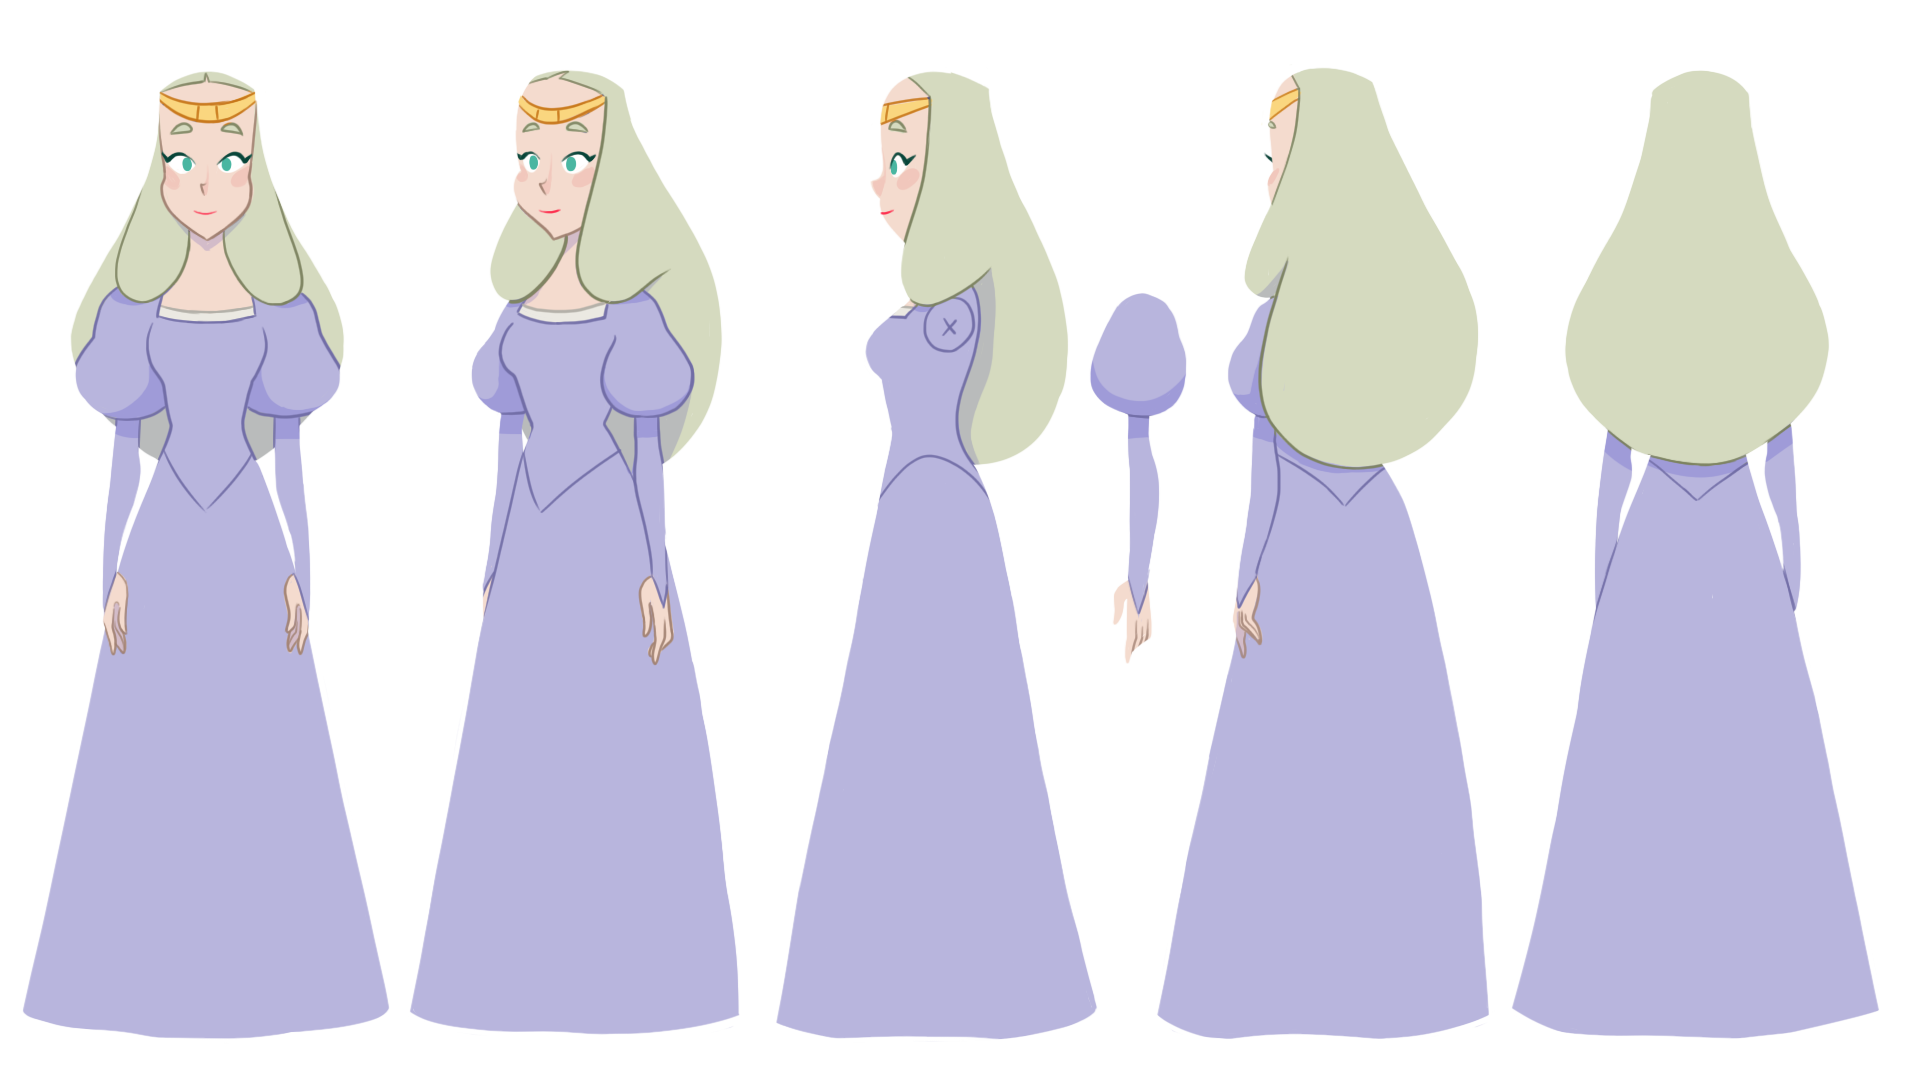 Turnaround of the character of Daphné, a medieval princess. She had waist long blond hair, a long lavender dress, and fair skin. She is wearing a golden crown.